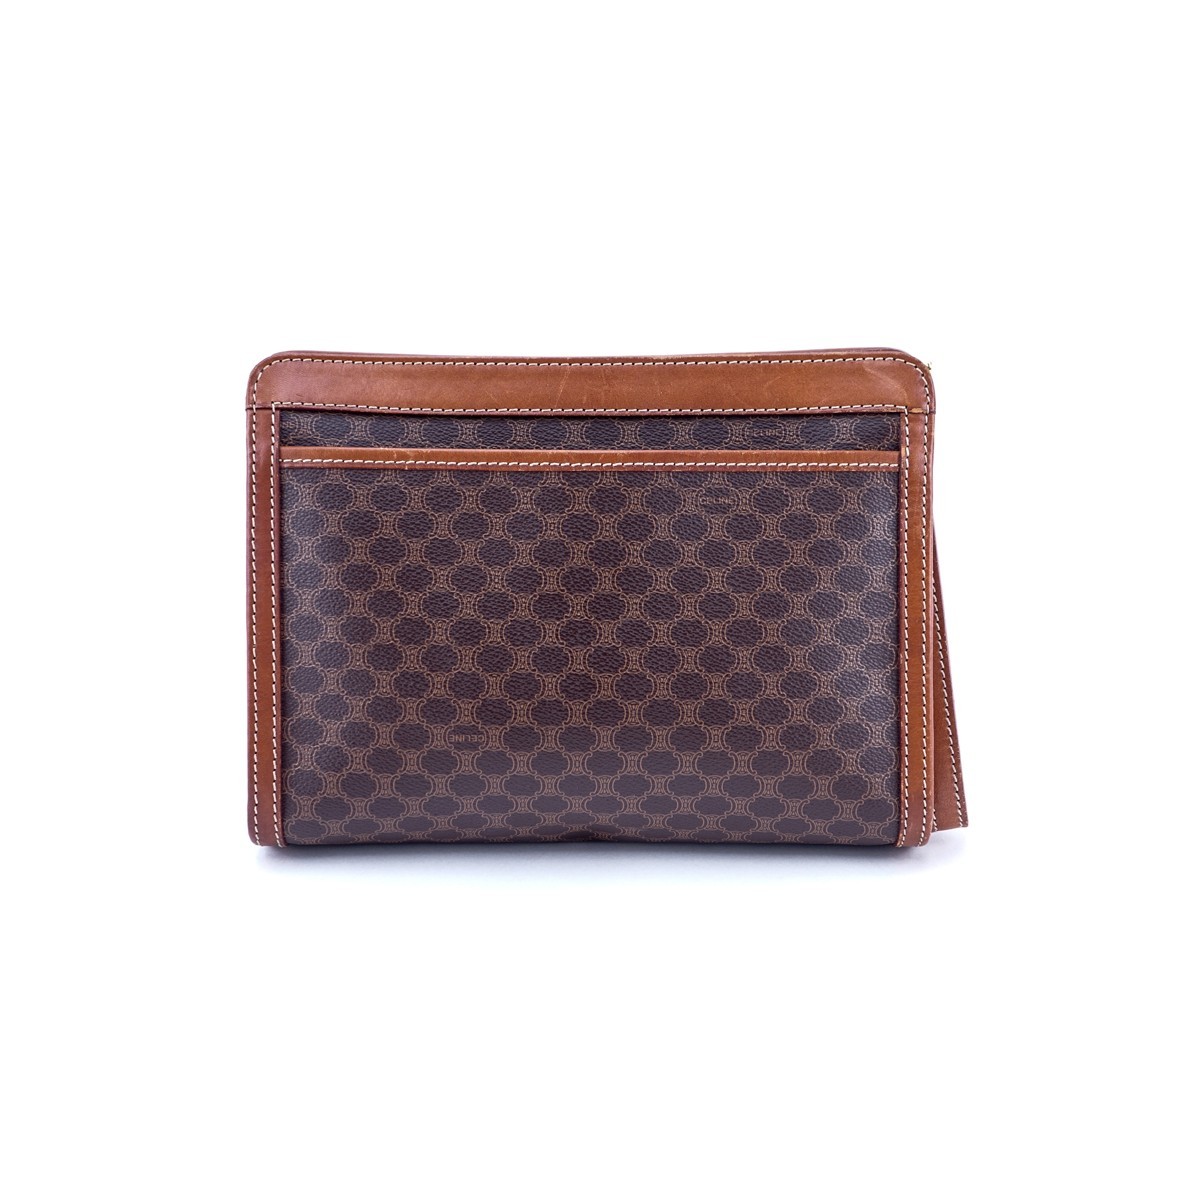 Celine Brown Macadame Coated Canvas Vintage Toiletry Pouch. Gold tone hardware, leather interior with zippered pockets.